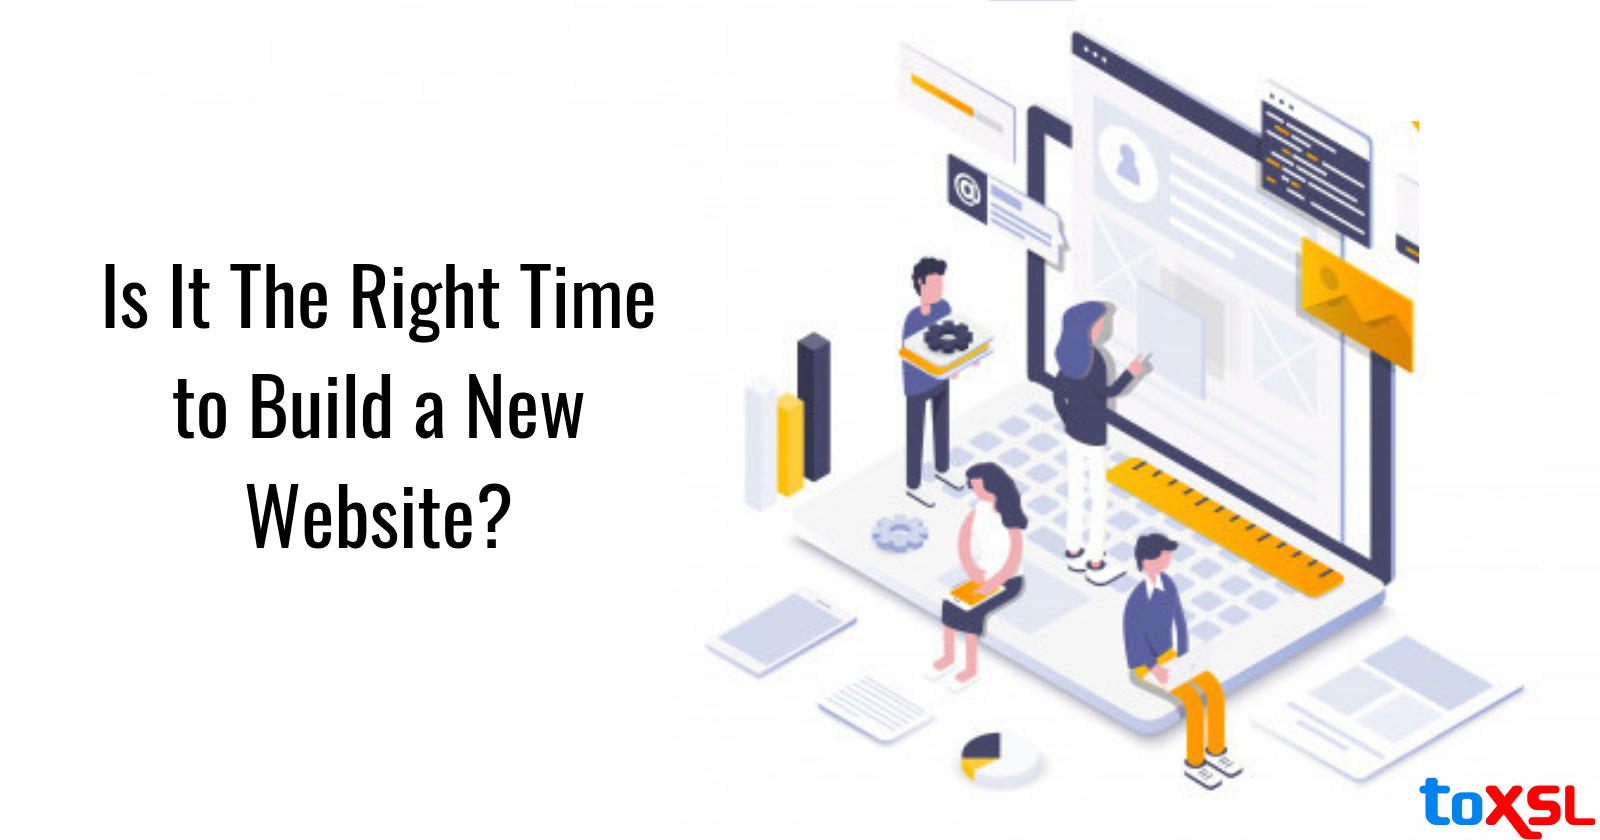 Does Your Business Need a New Website? Questions You Must Ask Yourself